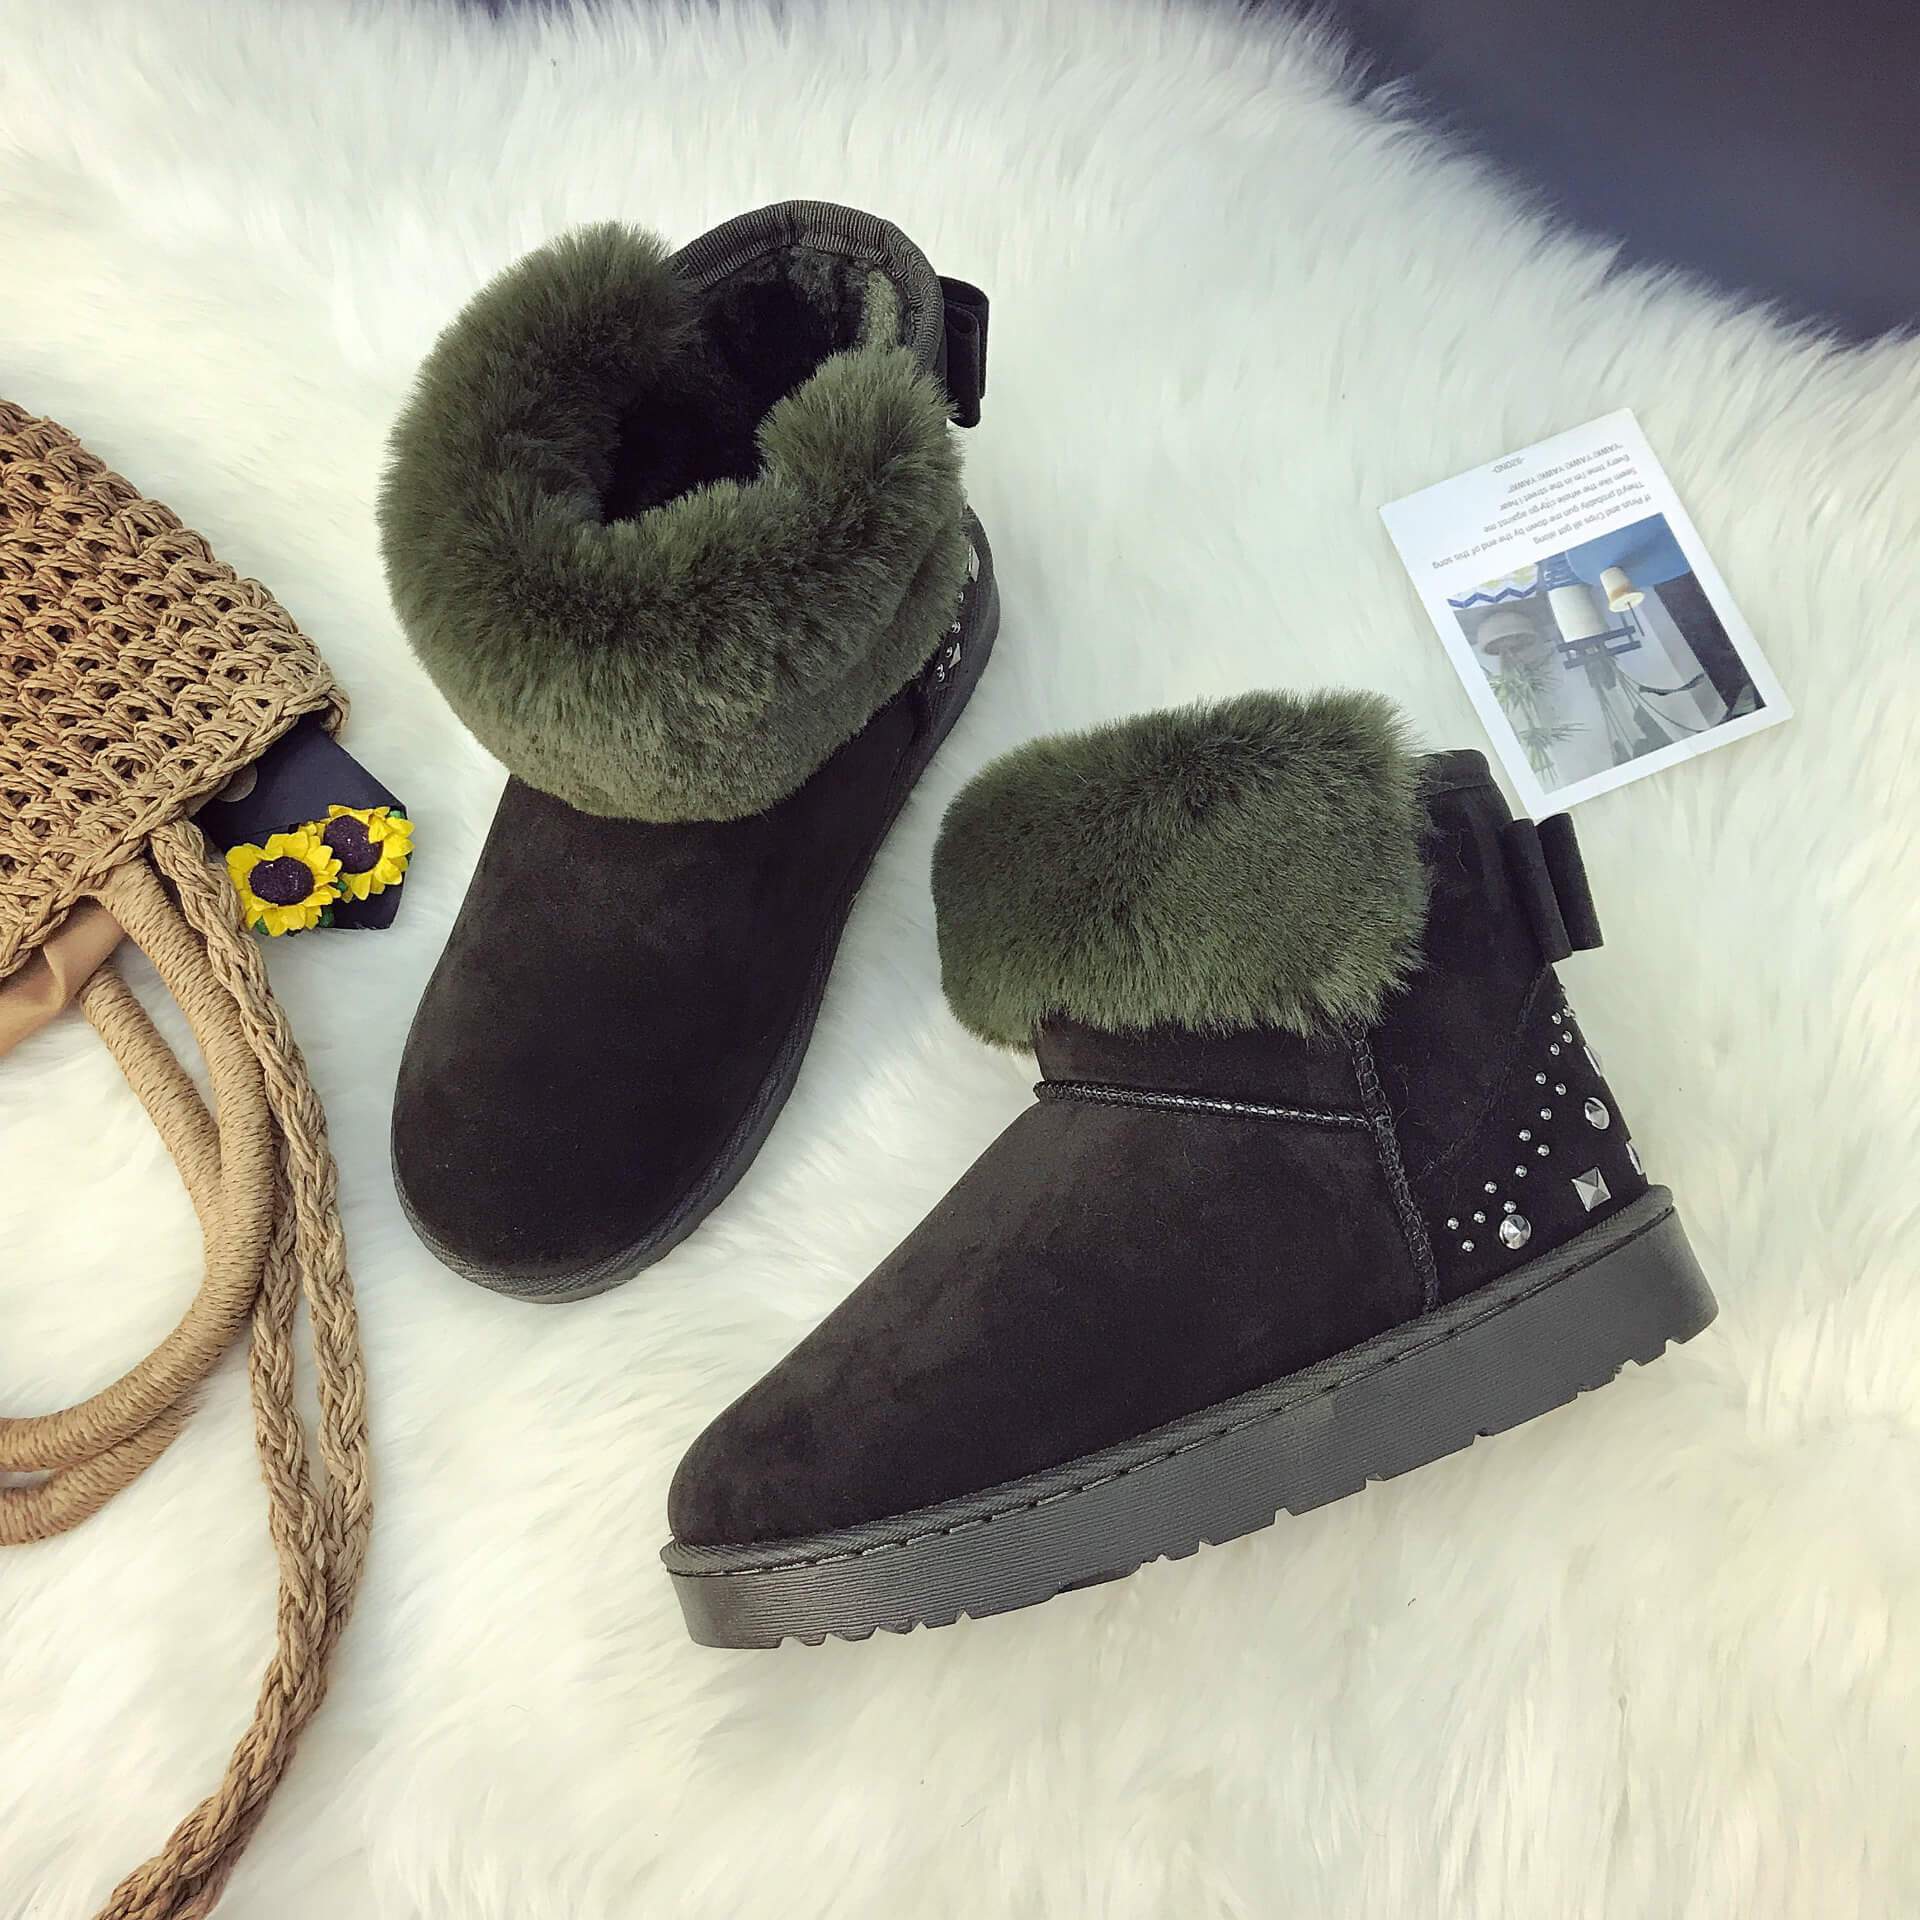 low Heel Snow Round Toe Flat Suede Boots